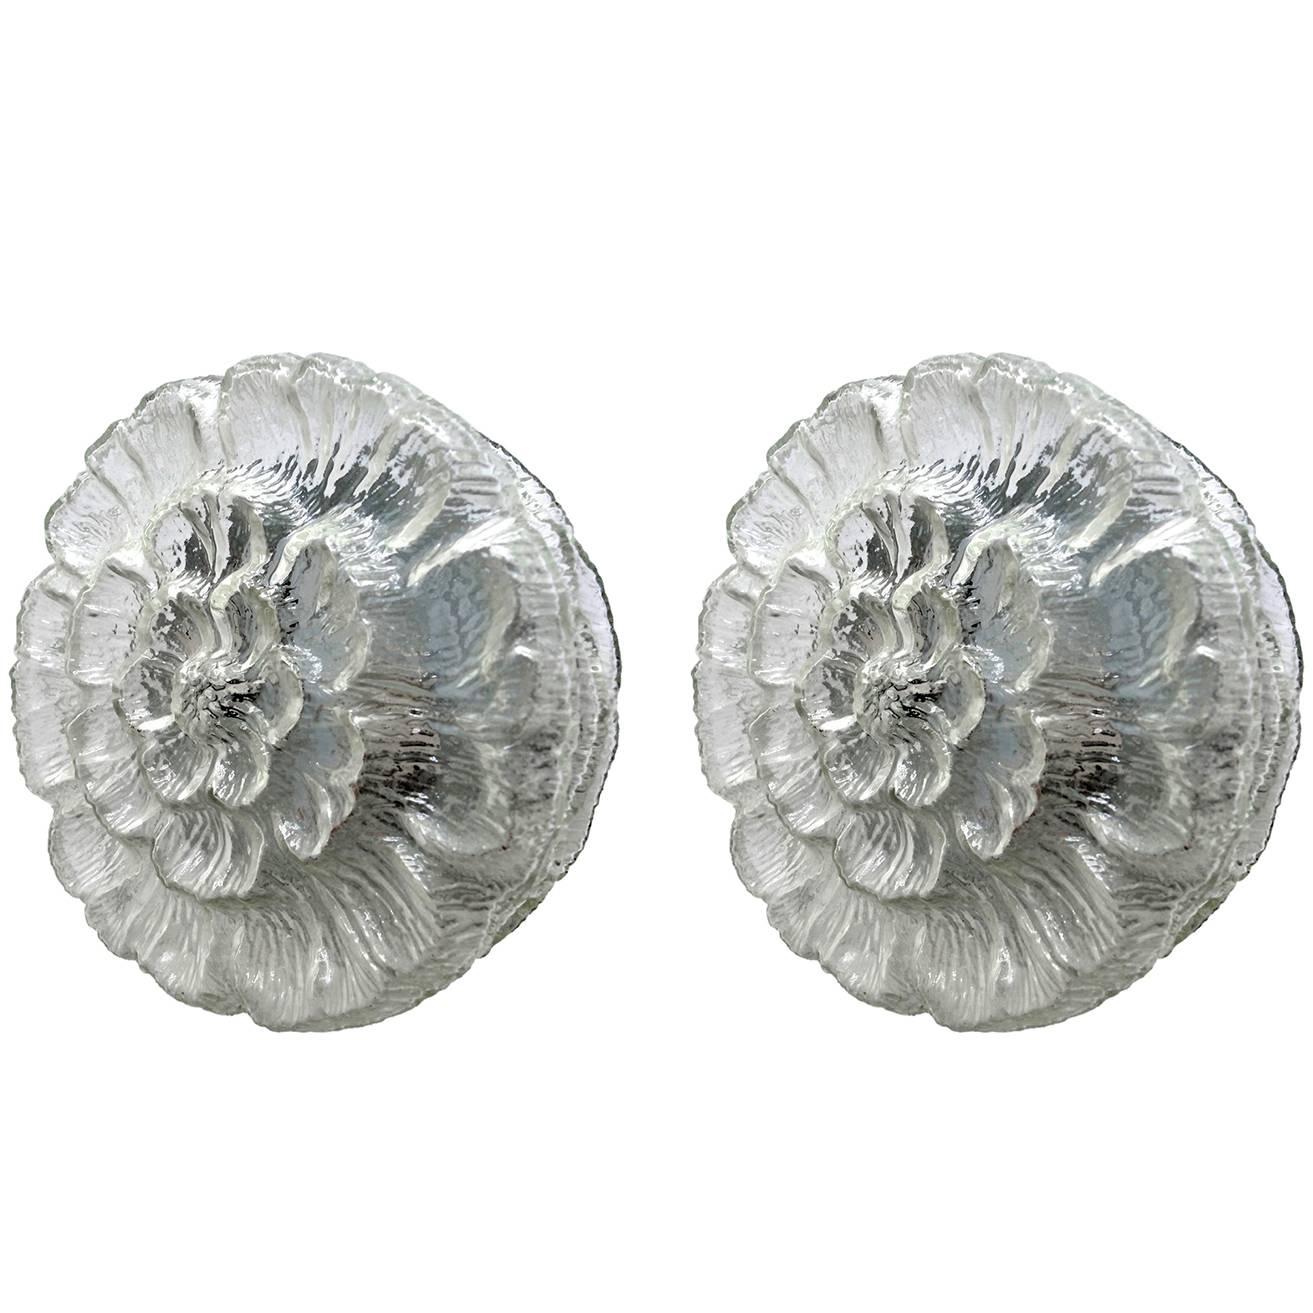 Pair of Rare German Vintage Glass Flower Ceiling or Wall Flush Mounts 1960s For Sale